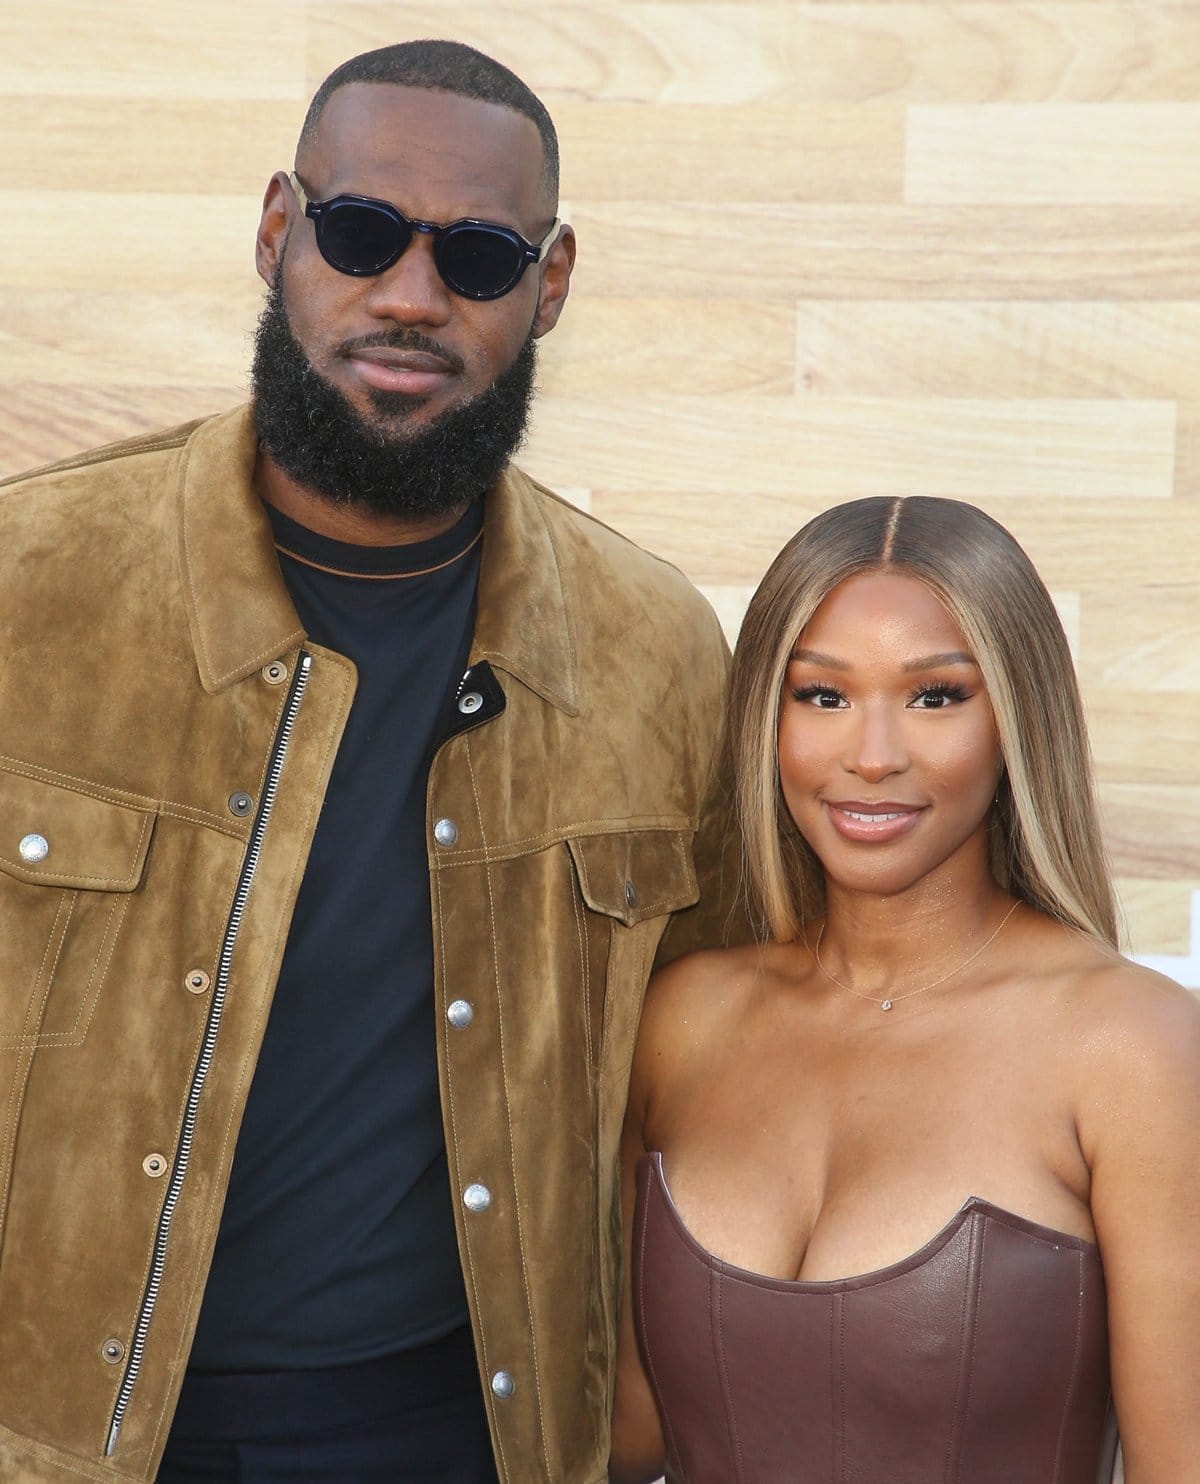 LeBron James towers over his much shorter wife Savannah at the premiere of his 2022 American sports comedy-drama film Hustle